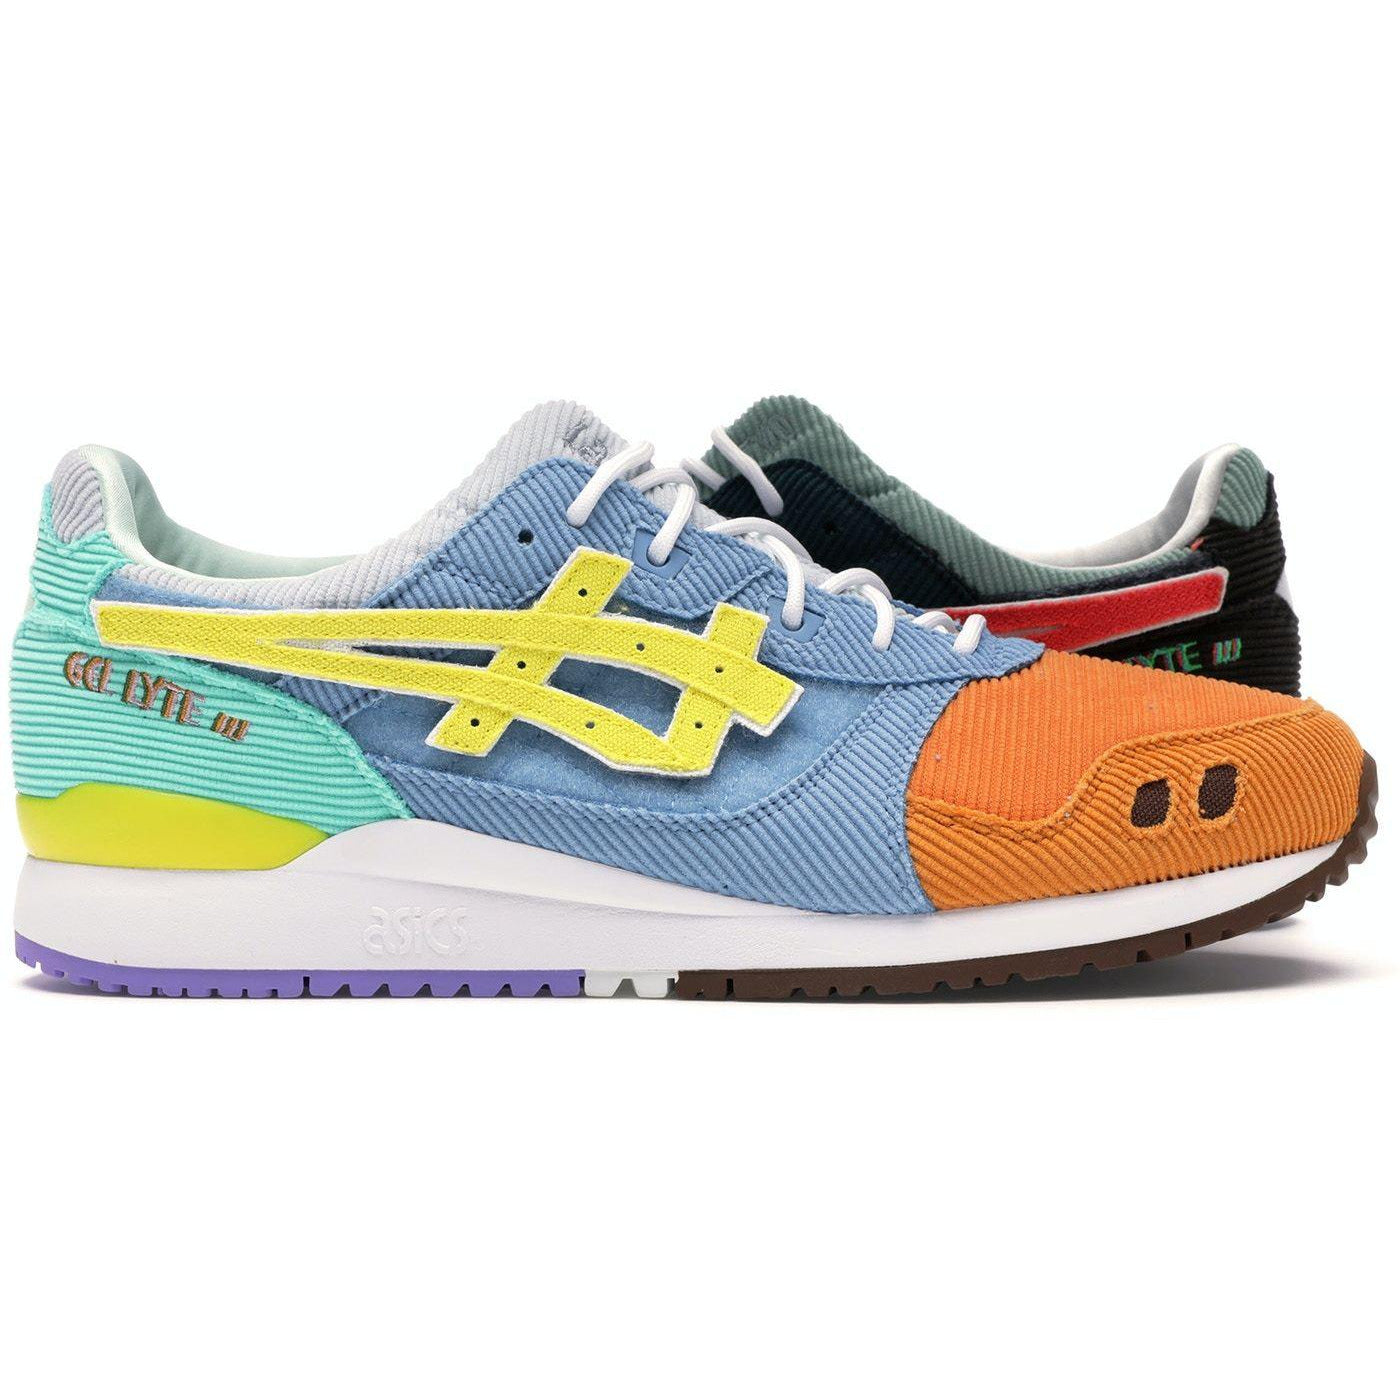 Asics Gel-Lyte III "Sean Wotherspoon x Atmos" - THE GAME